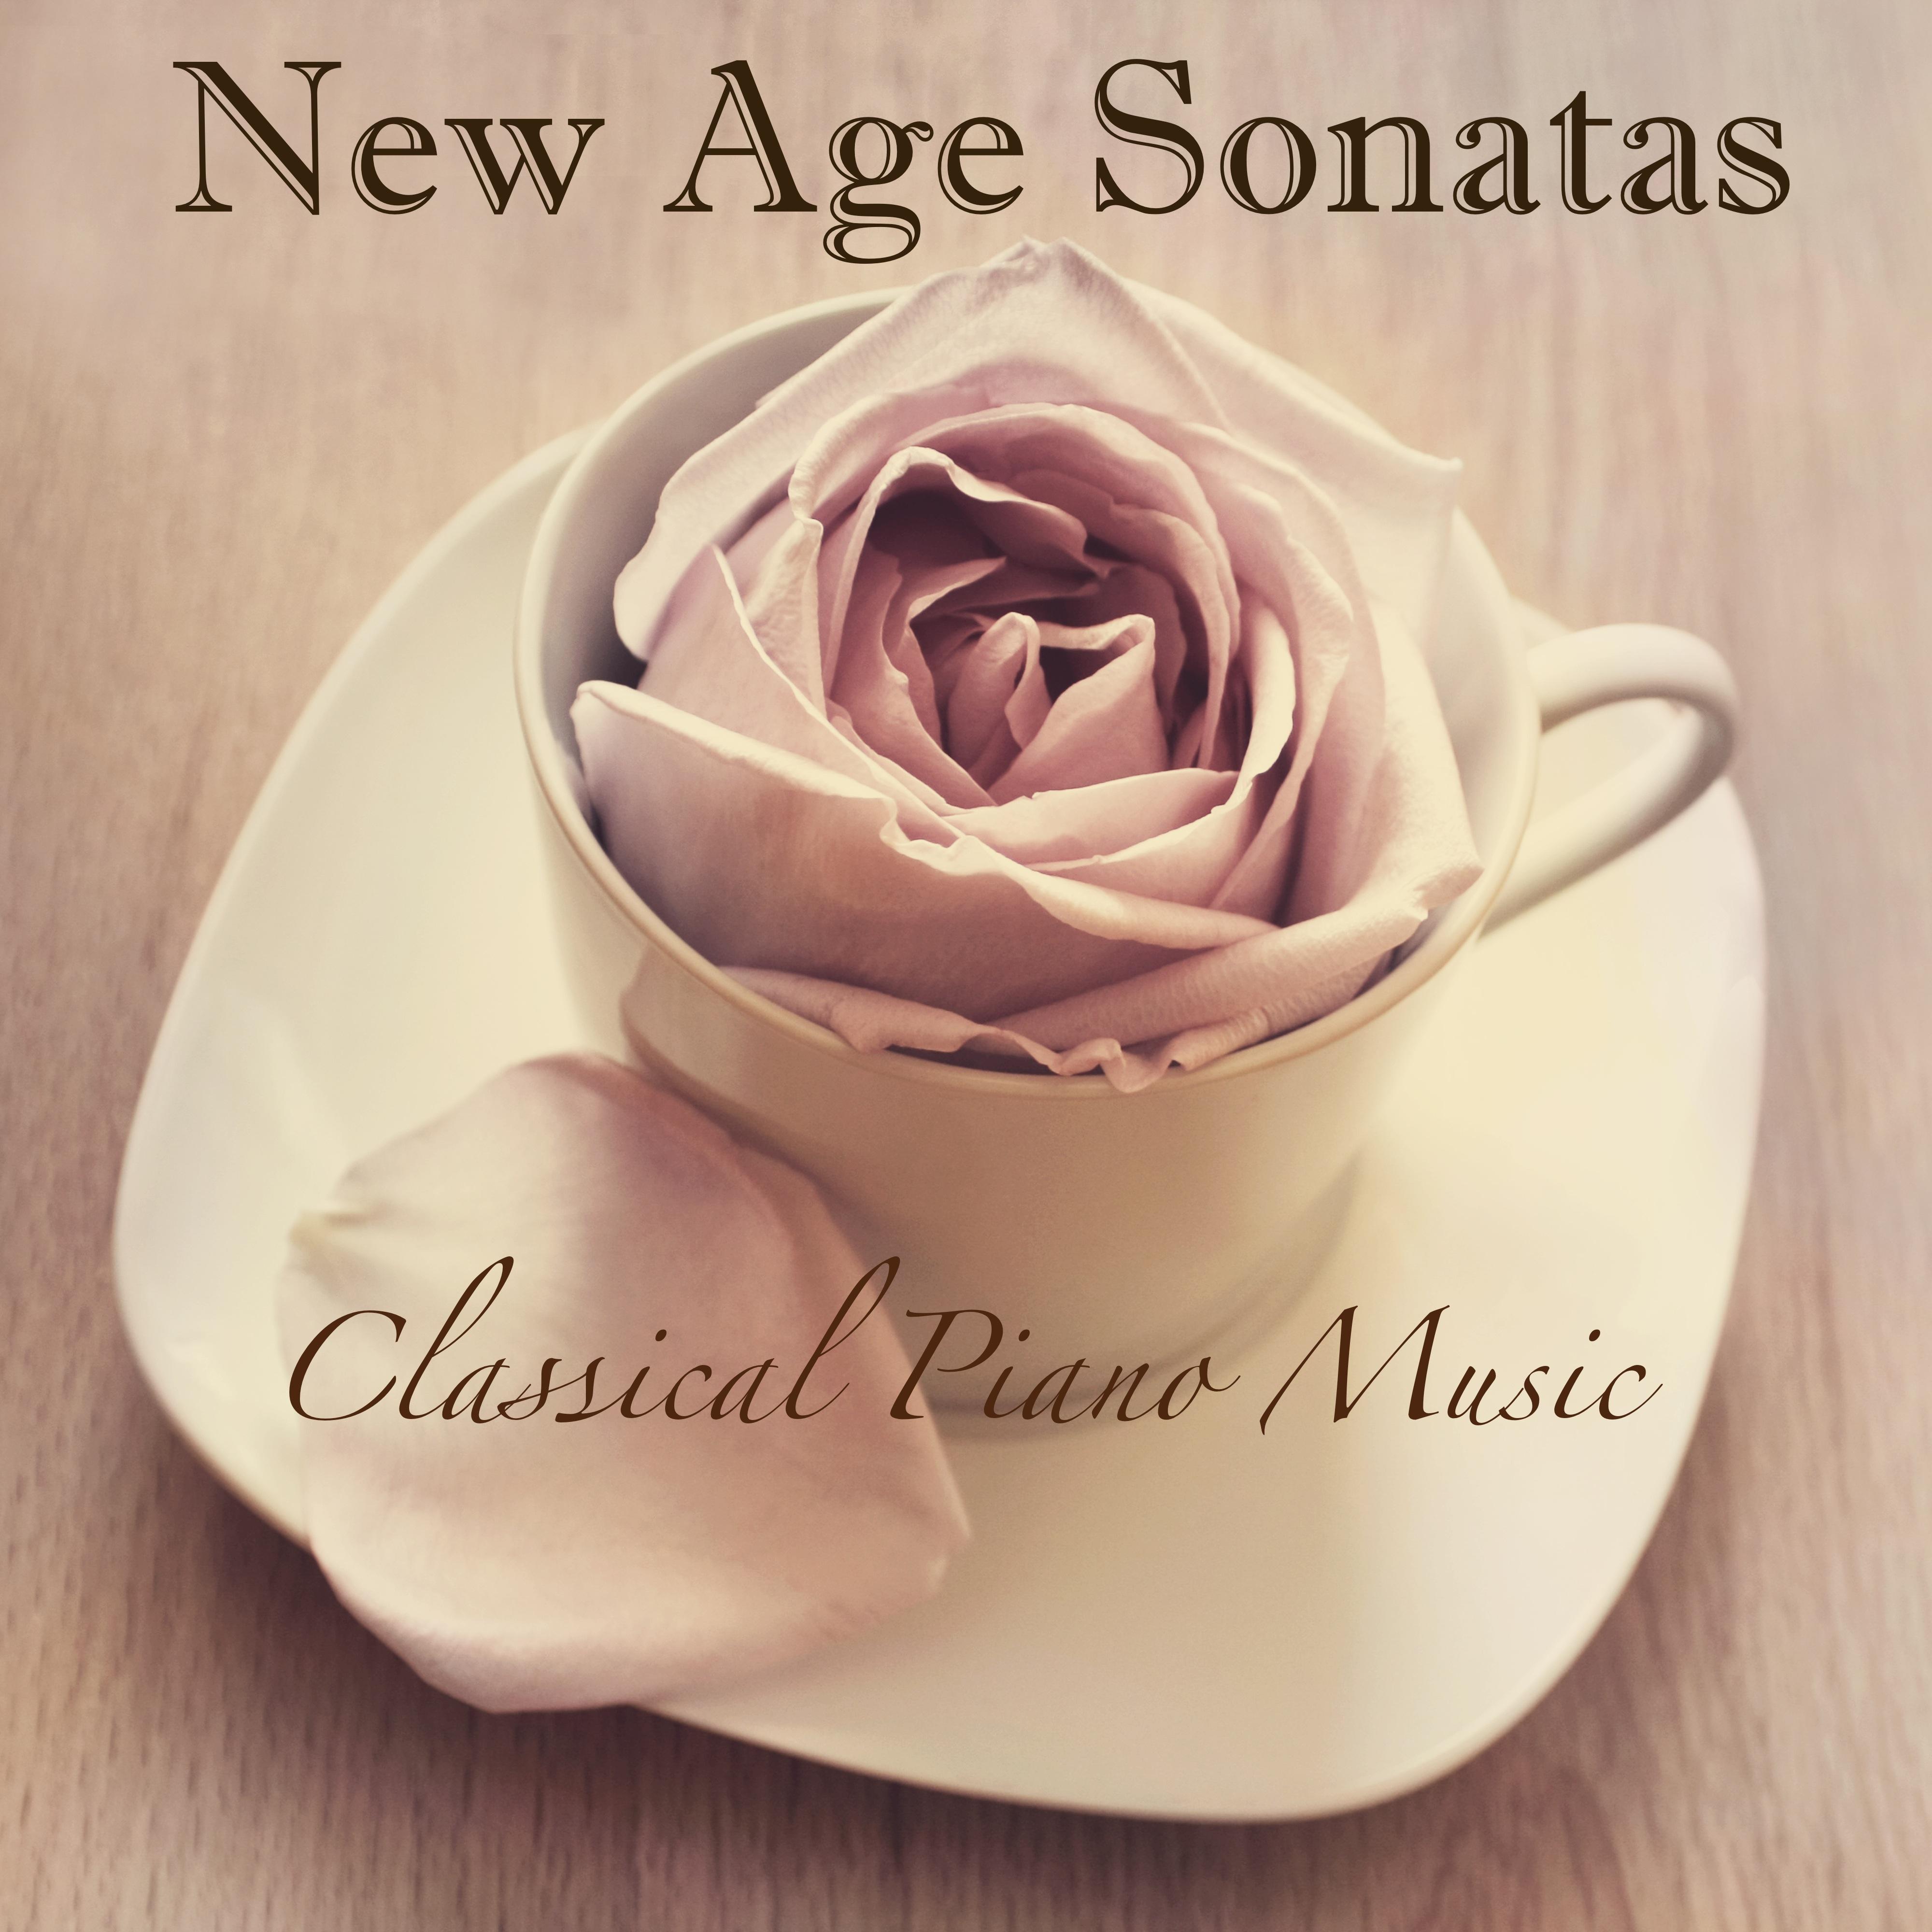 New Age Sonatas - Classical Piano Music for Relaxation, Sleeping, Studying, Zen Meditation